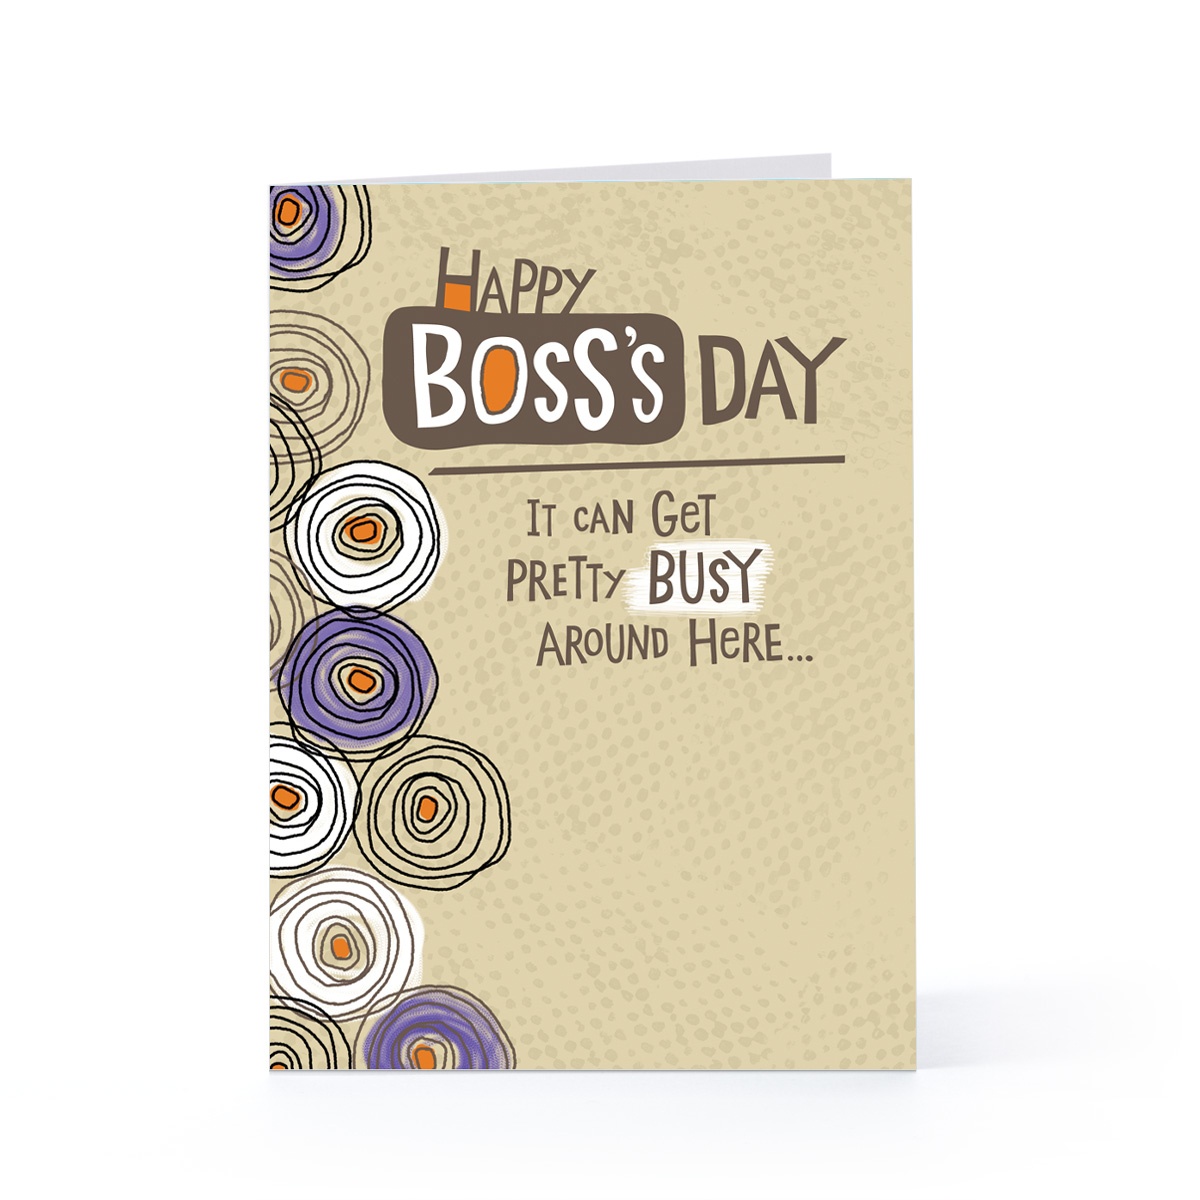 bosses-day-cards-printable-best-free-printable